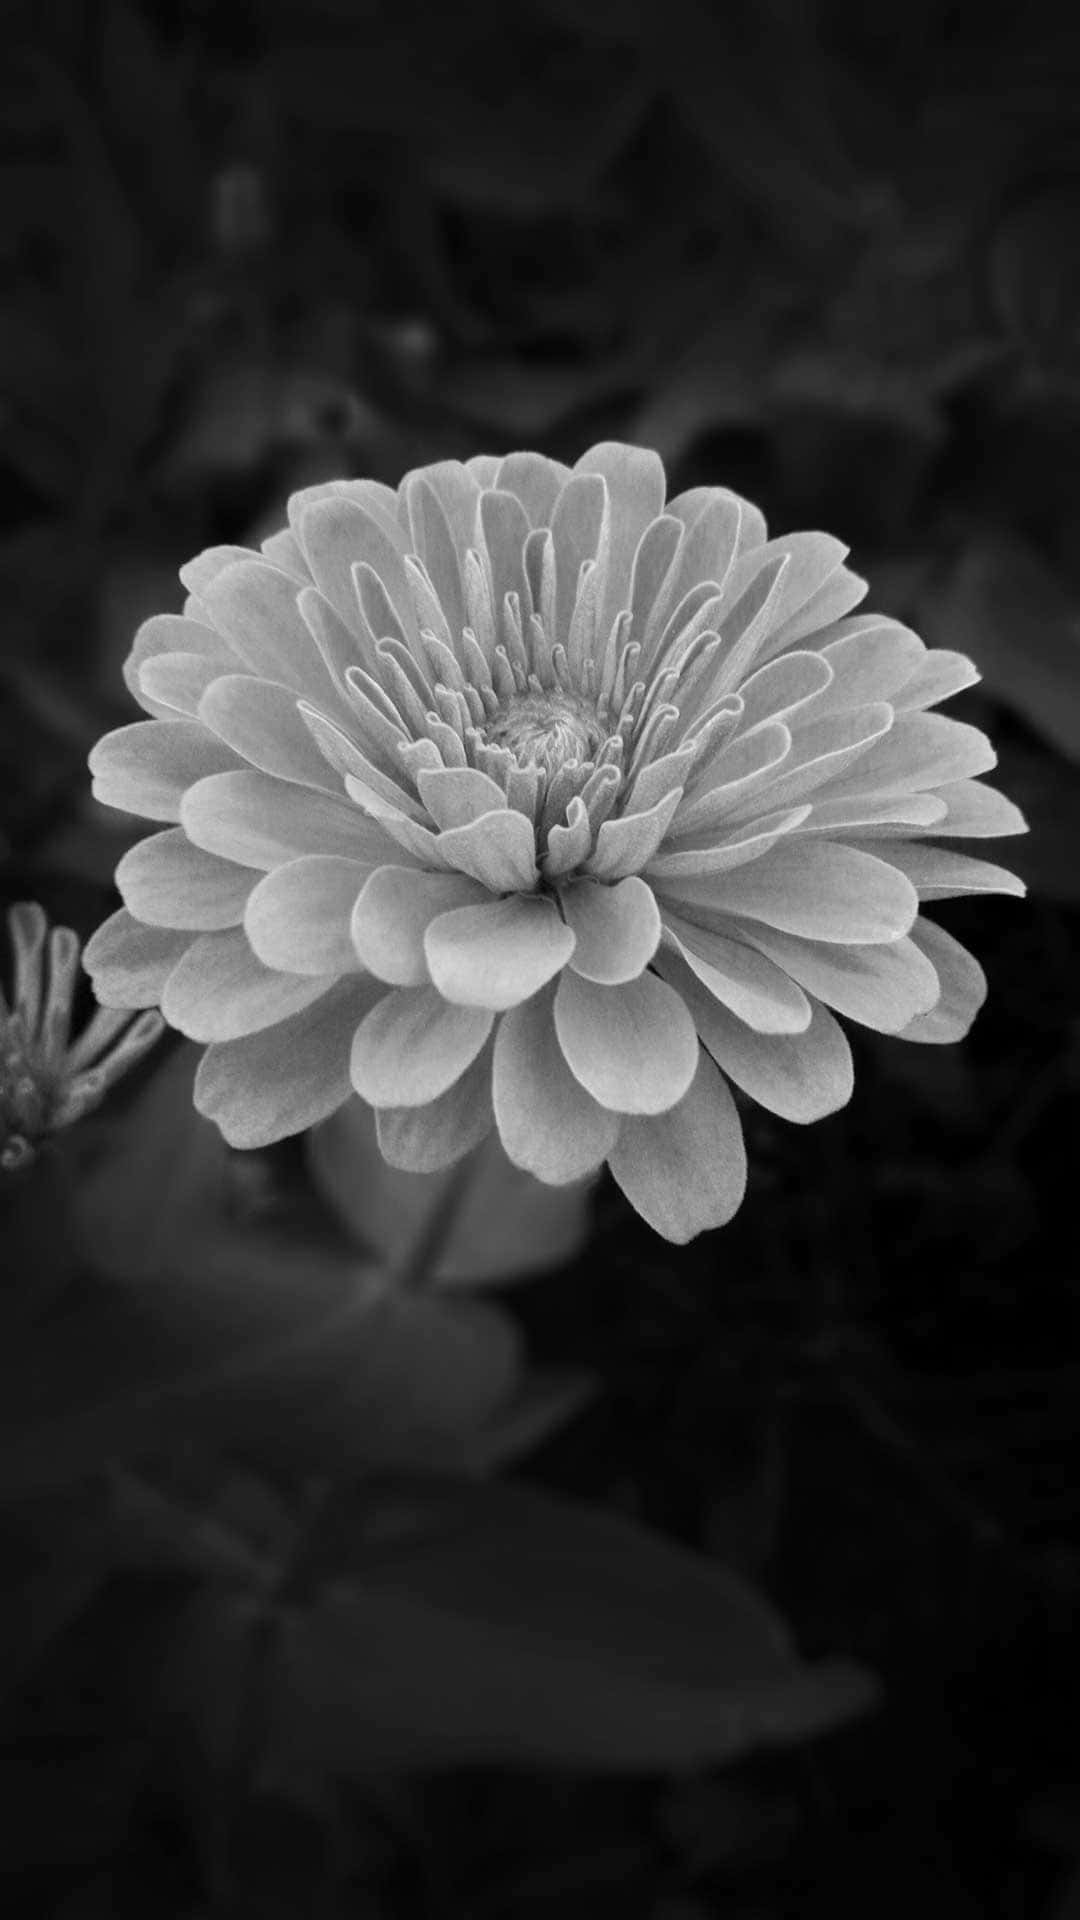 Black And White Solo Dahlia Flower Iphone Wallpaper